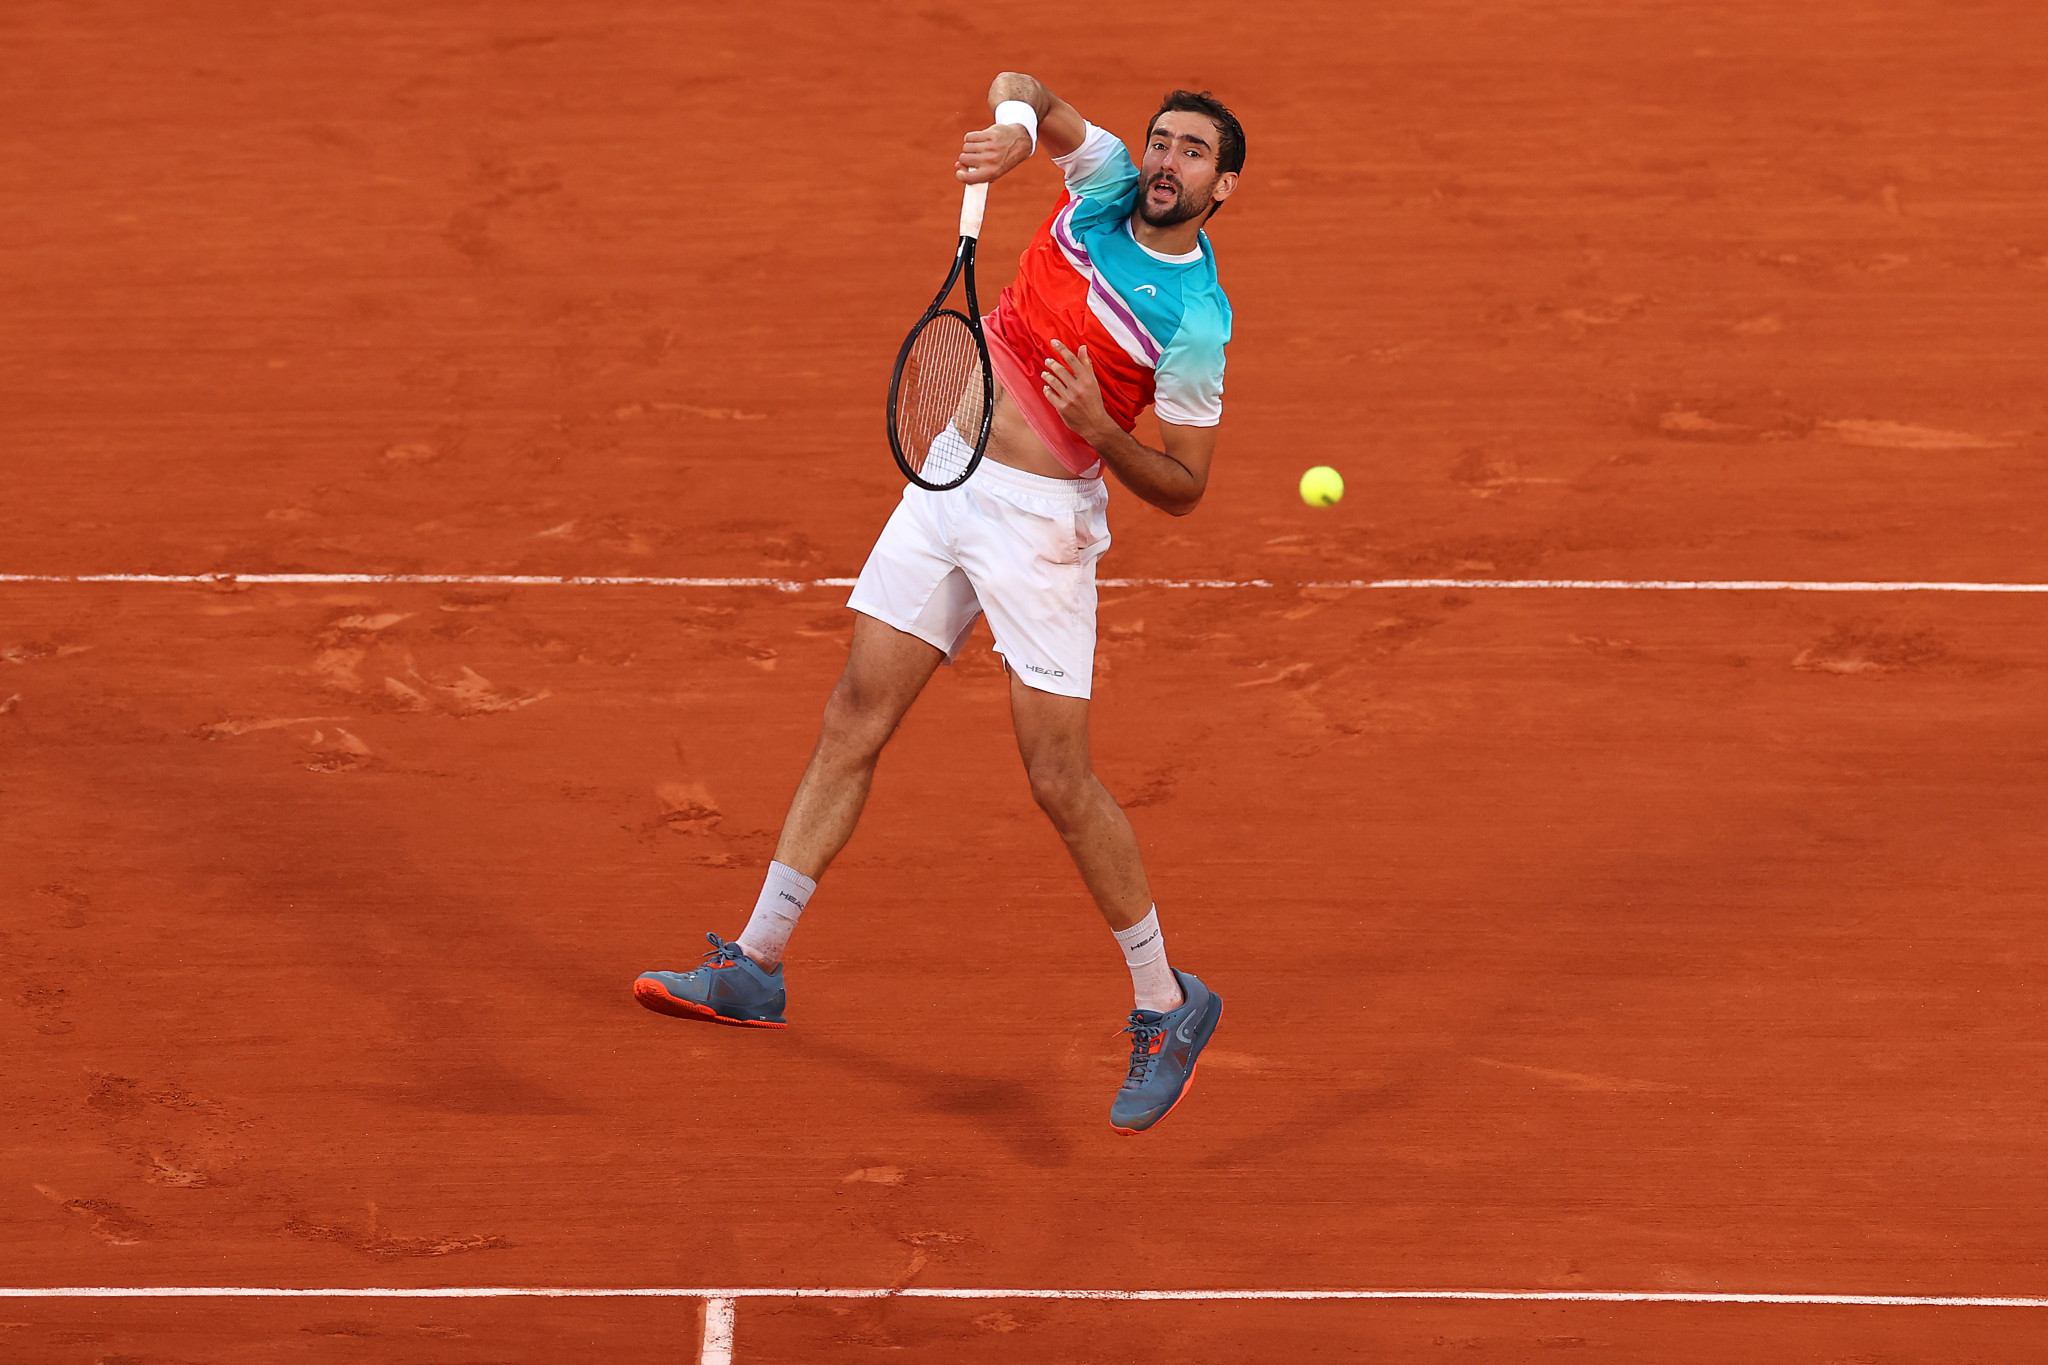 Marin Čilić failed to capitalise after winning the first set against Casper Ruud ©Getty Images